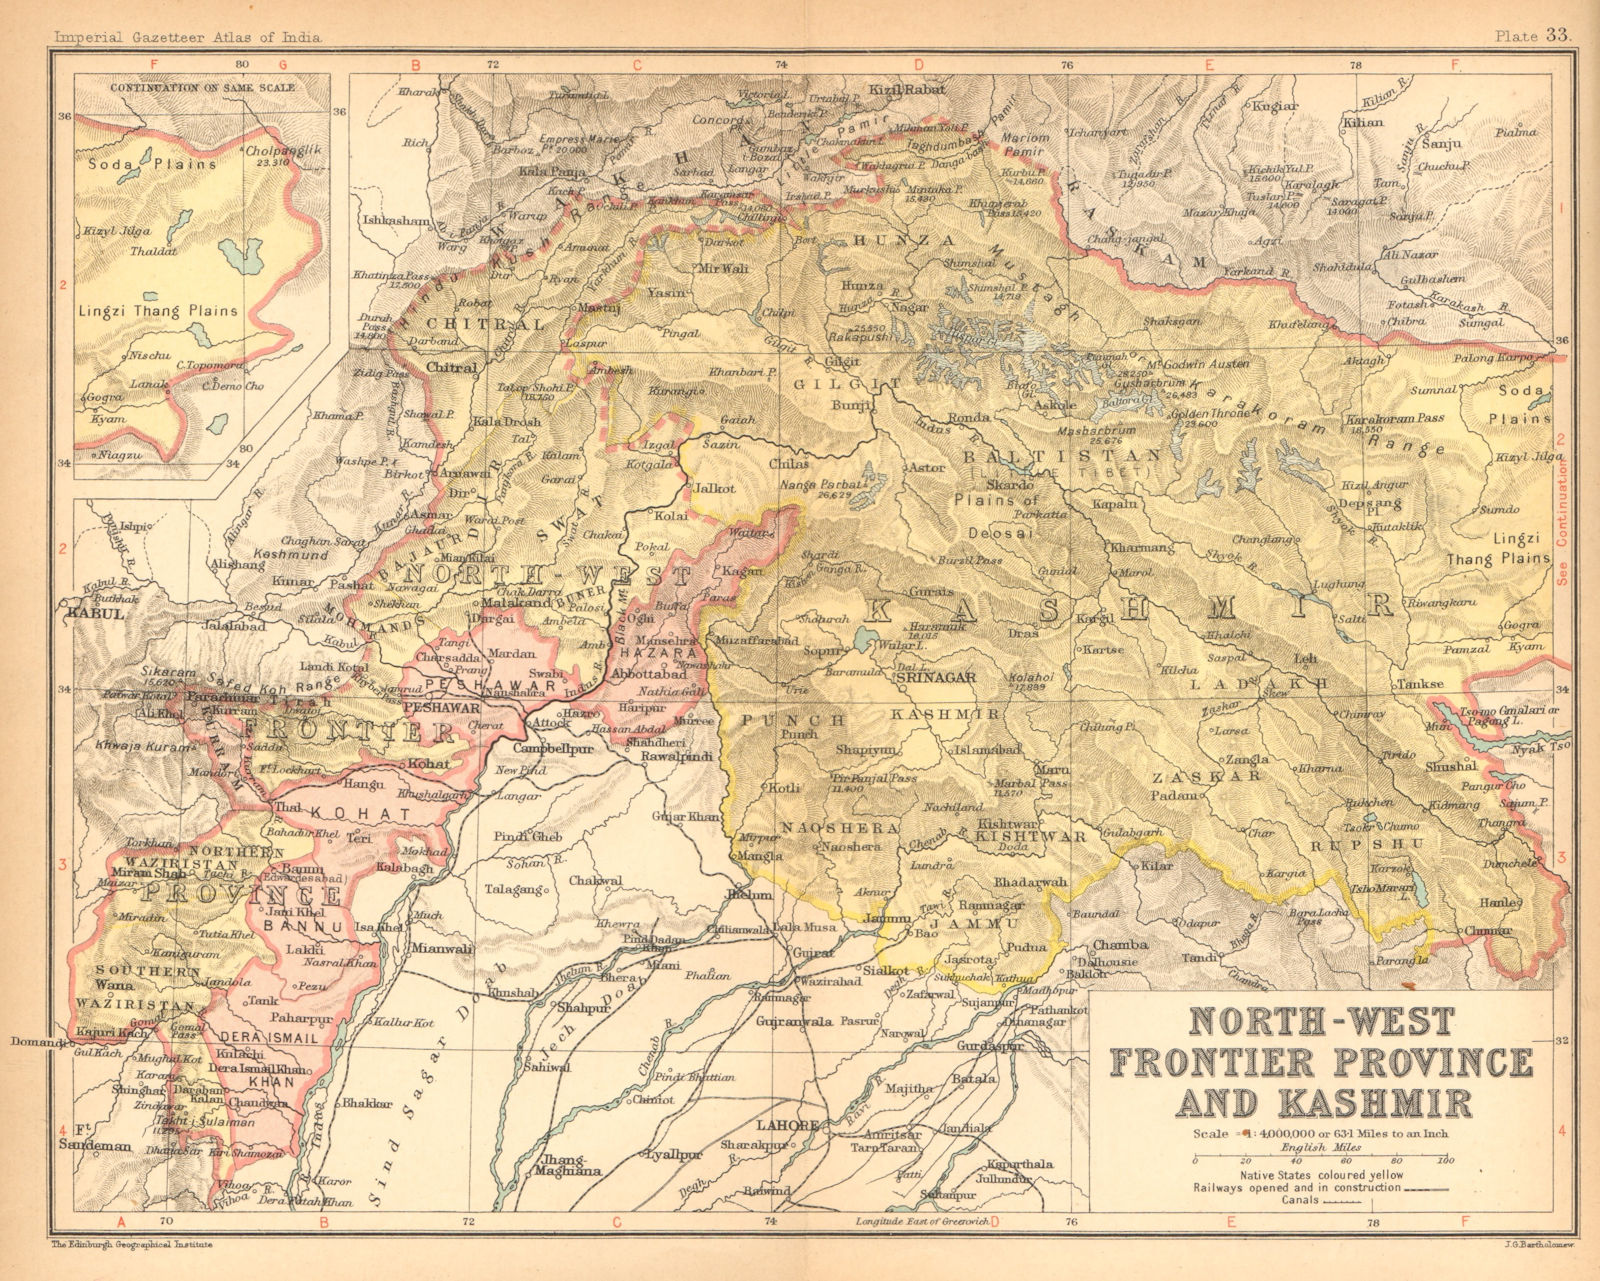 'North-West Frontier Province & Kashmir'. British India/Pakistan 1909 old map